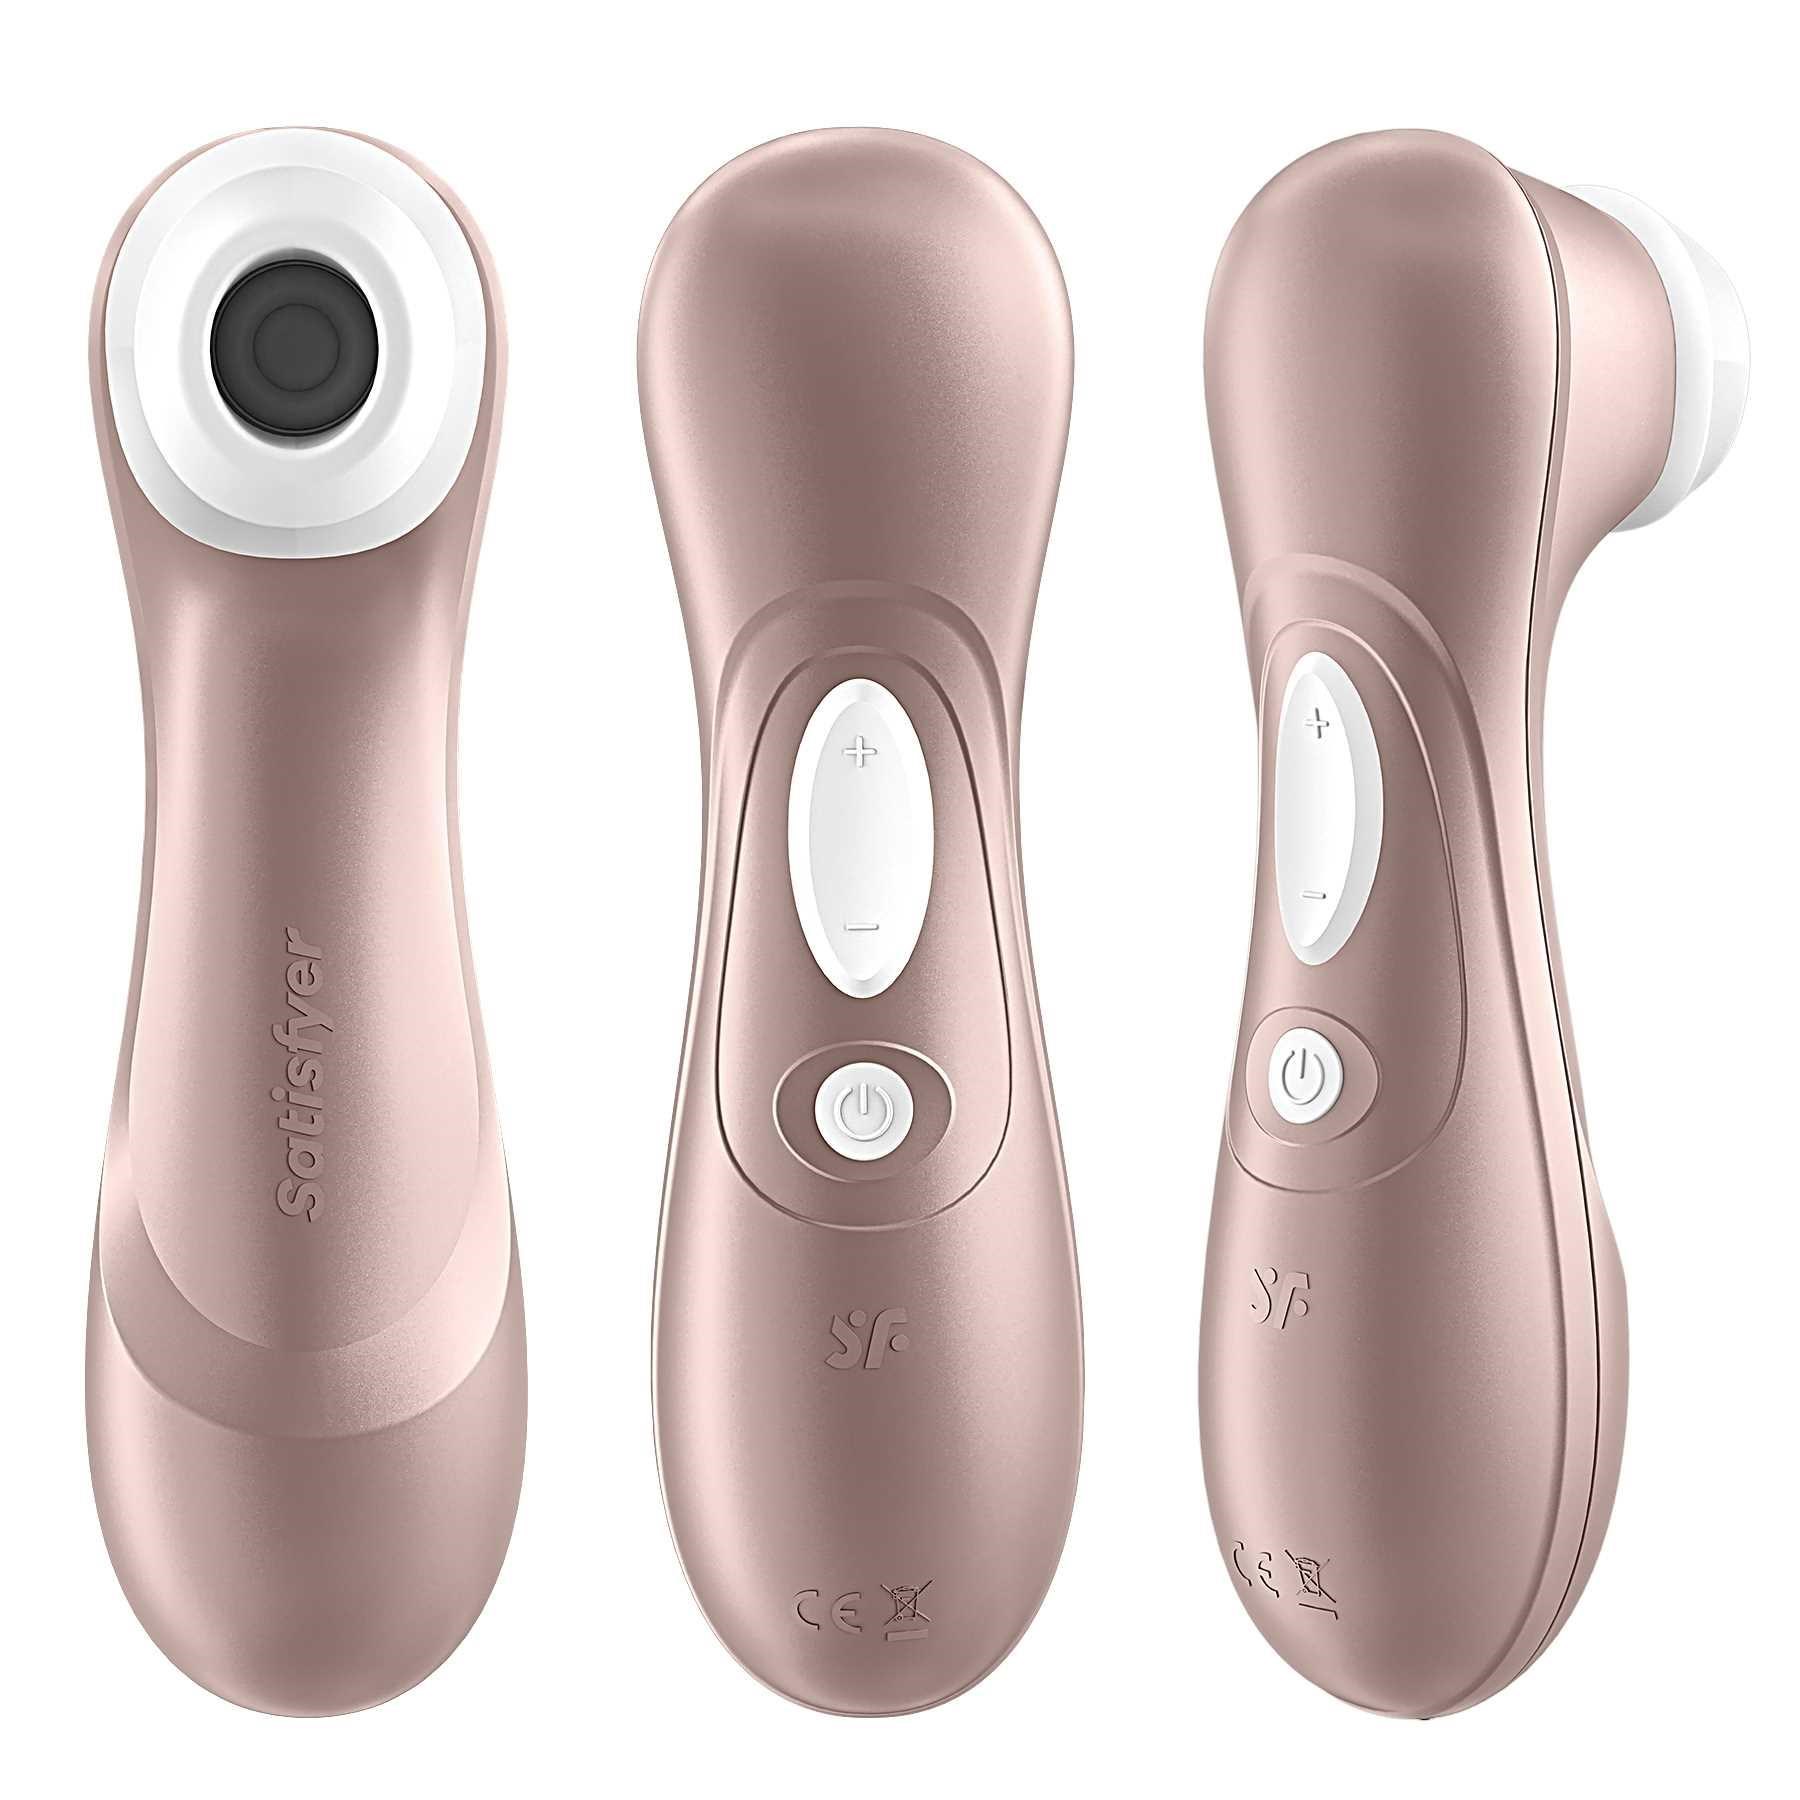 Satisfyer Pro 2 - Next Generation front back and side view